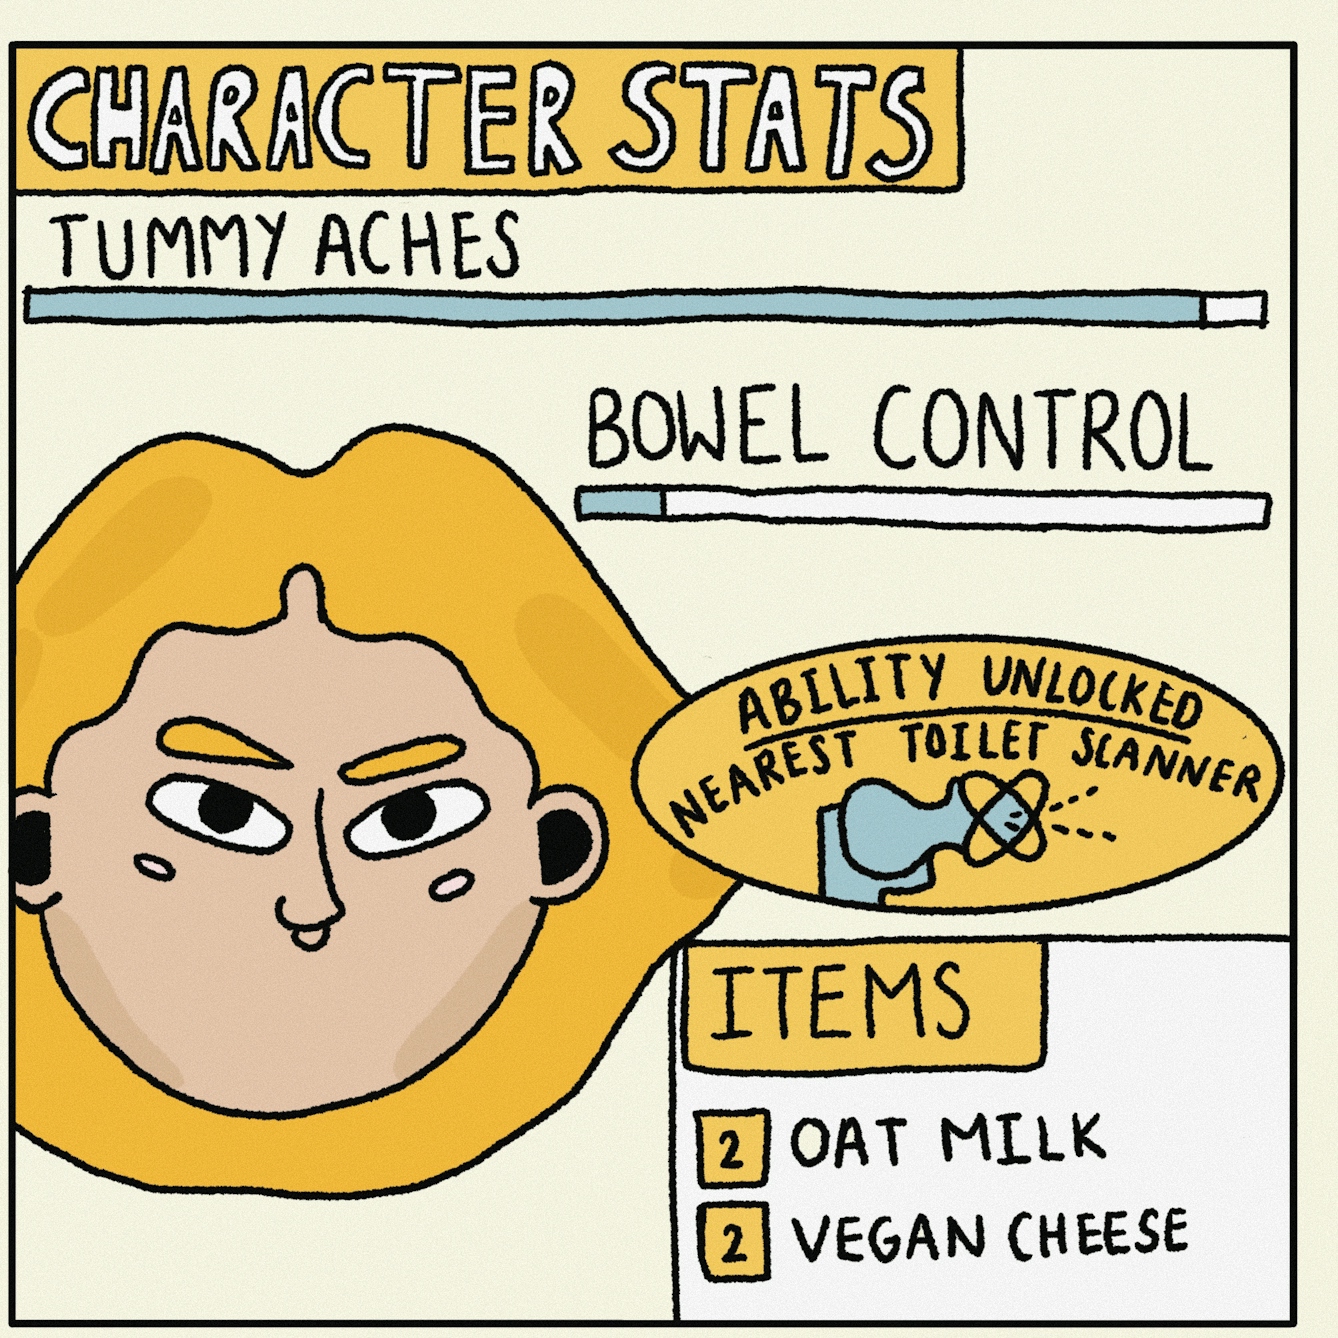 Panel 2 of a digitally drawn, four-panel comic titled ‘Down the Toilet’. The text at the top says ‘CHARACTER STATS’. The sliders show this character has a high level of tummy aches and very little bowel control. They are also carrying two ‘oat milks’ and two ‘vegan cheese’ in their inventory and have unlocked a new ability to scan for the nearest toilet.